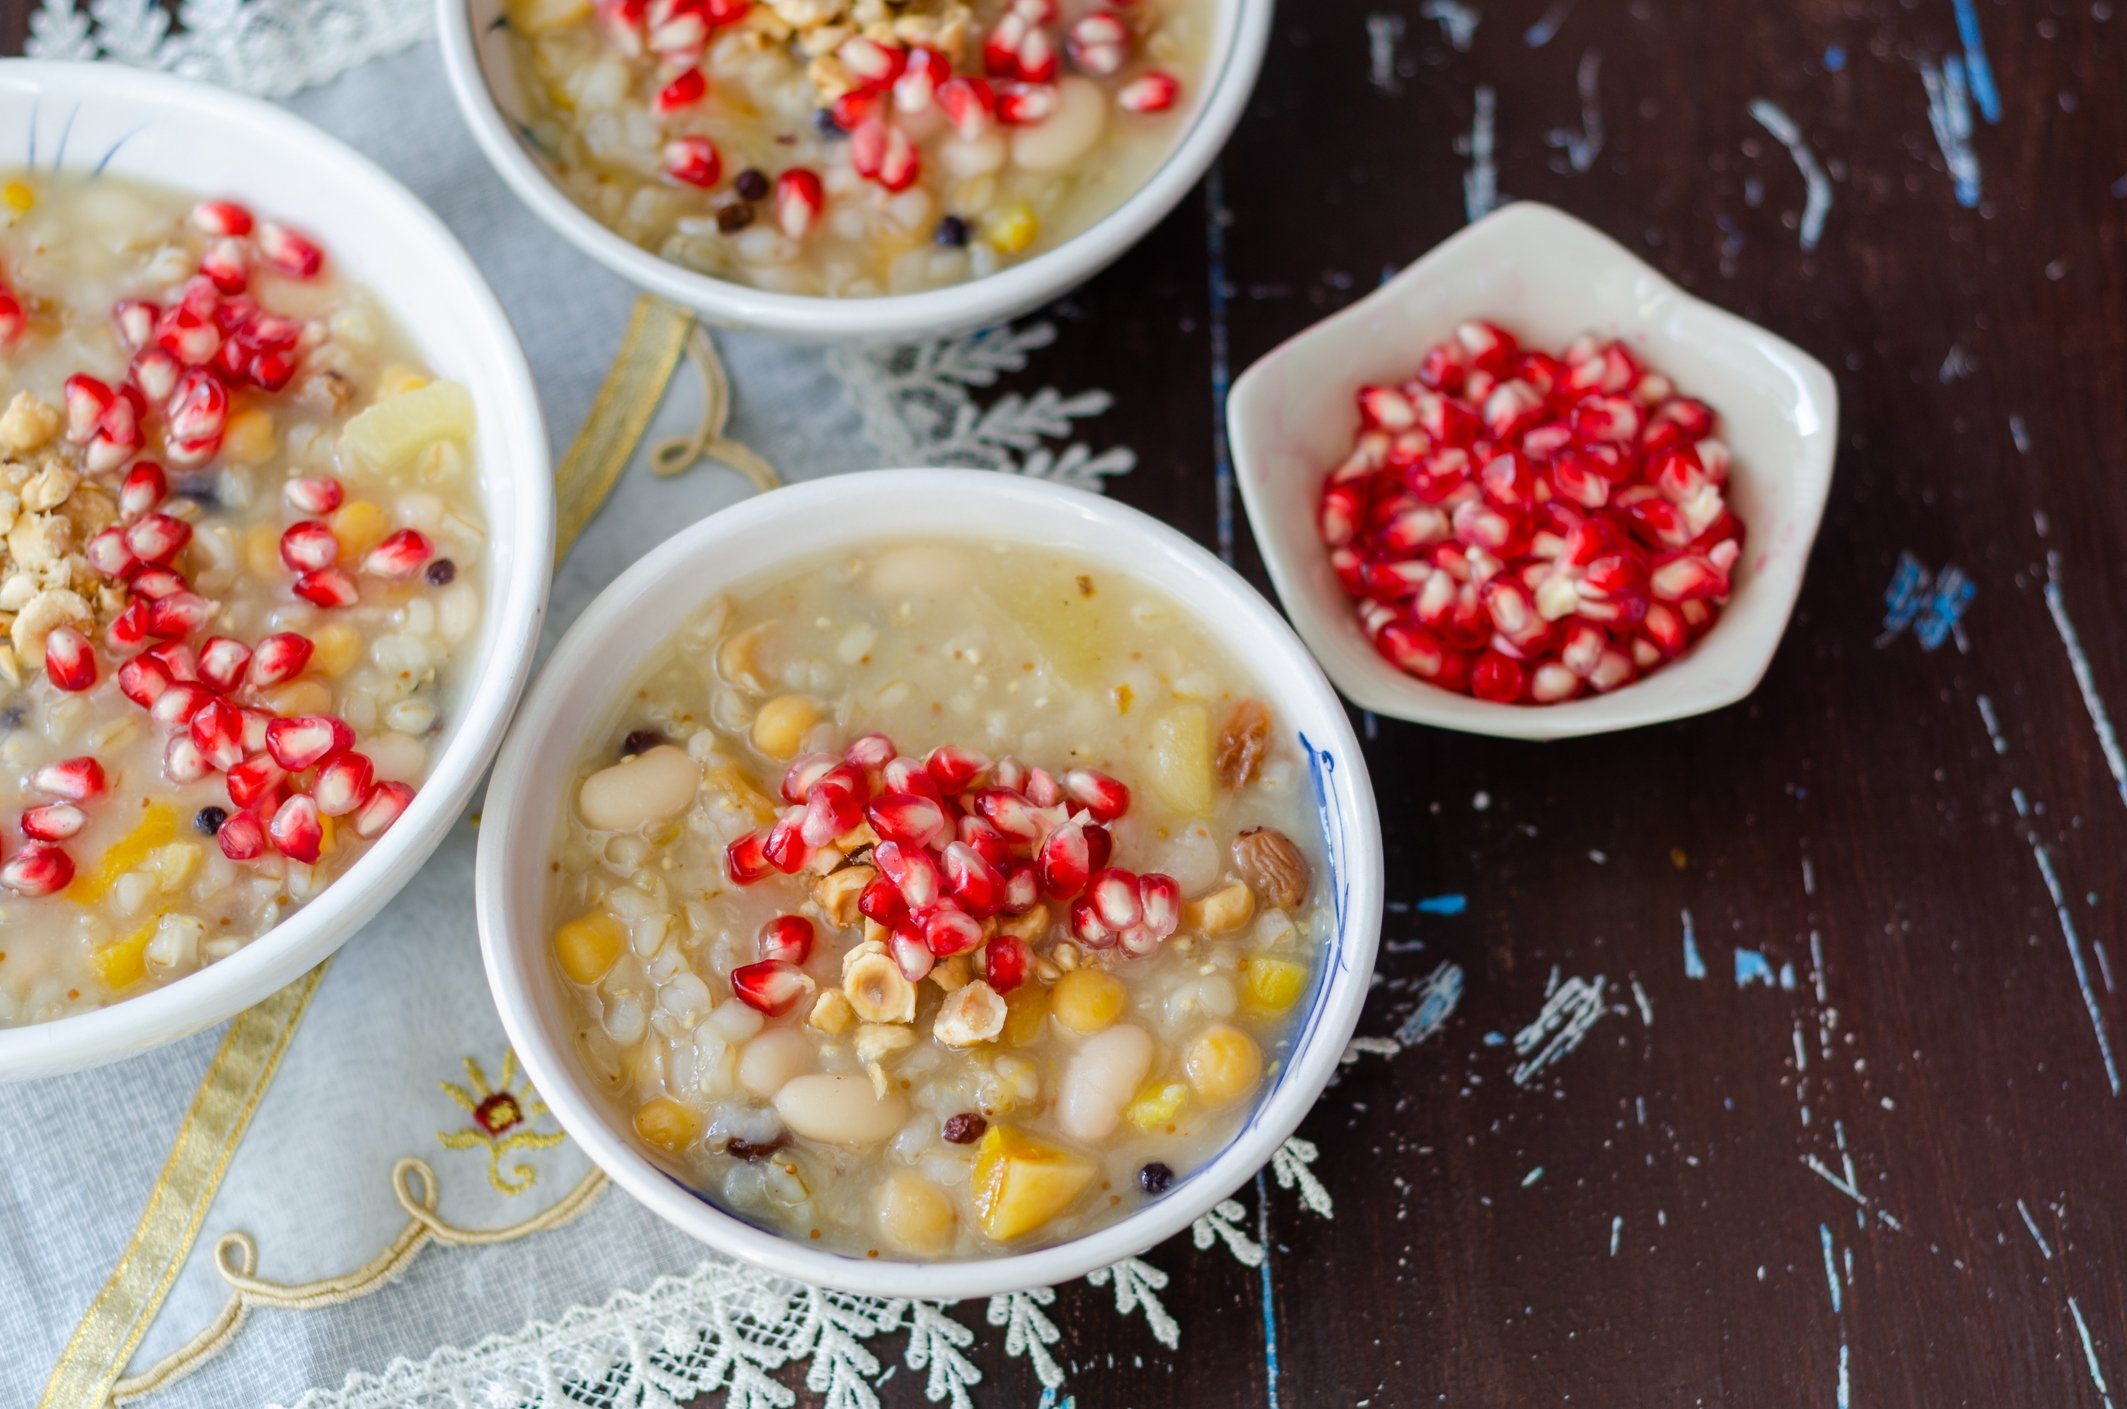 The traditional Turkish dessert ashura also contains pomegranate arils, in addition to a variety of other fruits and nuts. (iStock Photo)